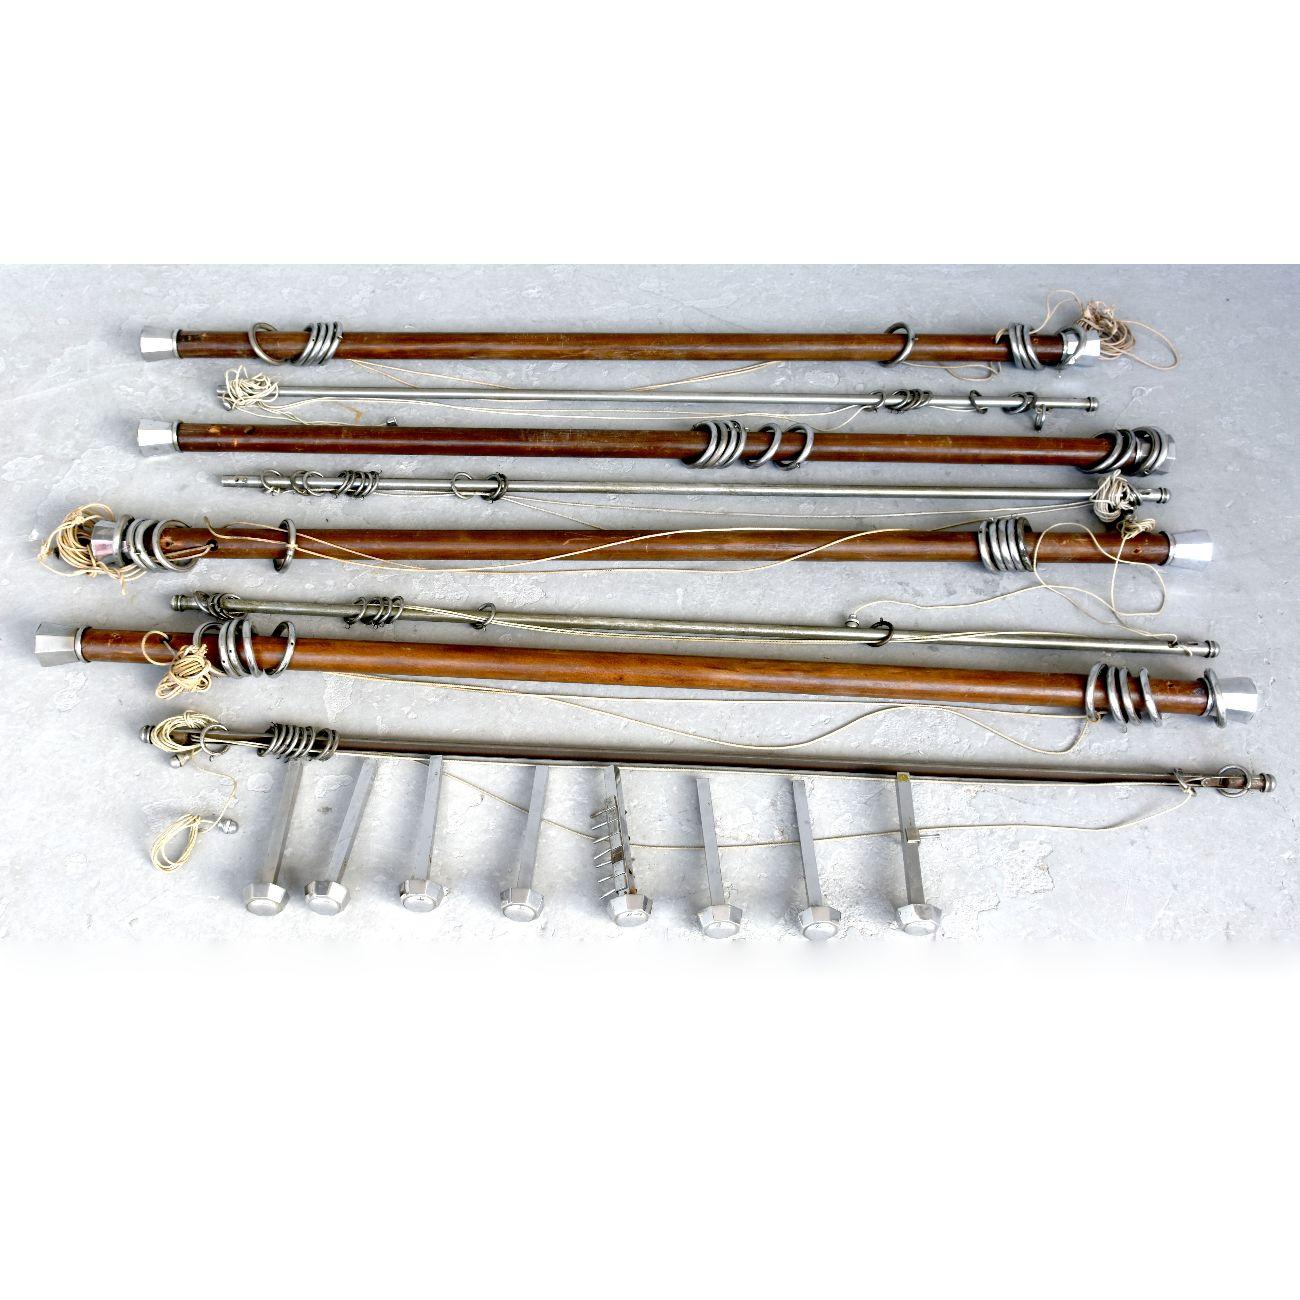 Set of 4 curtain rods 1930 art deco in wood and silver metal, Measures: length 163 cm.